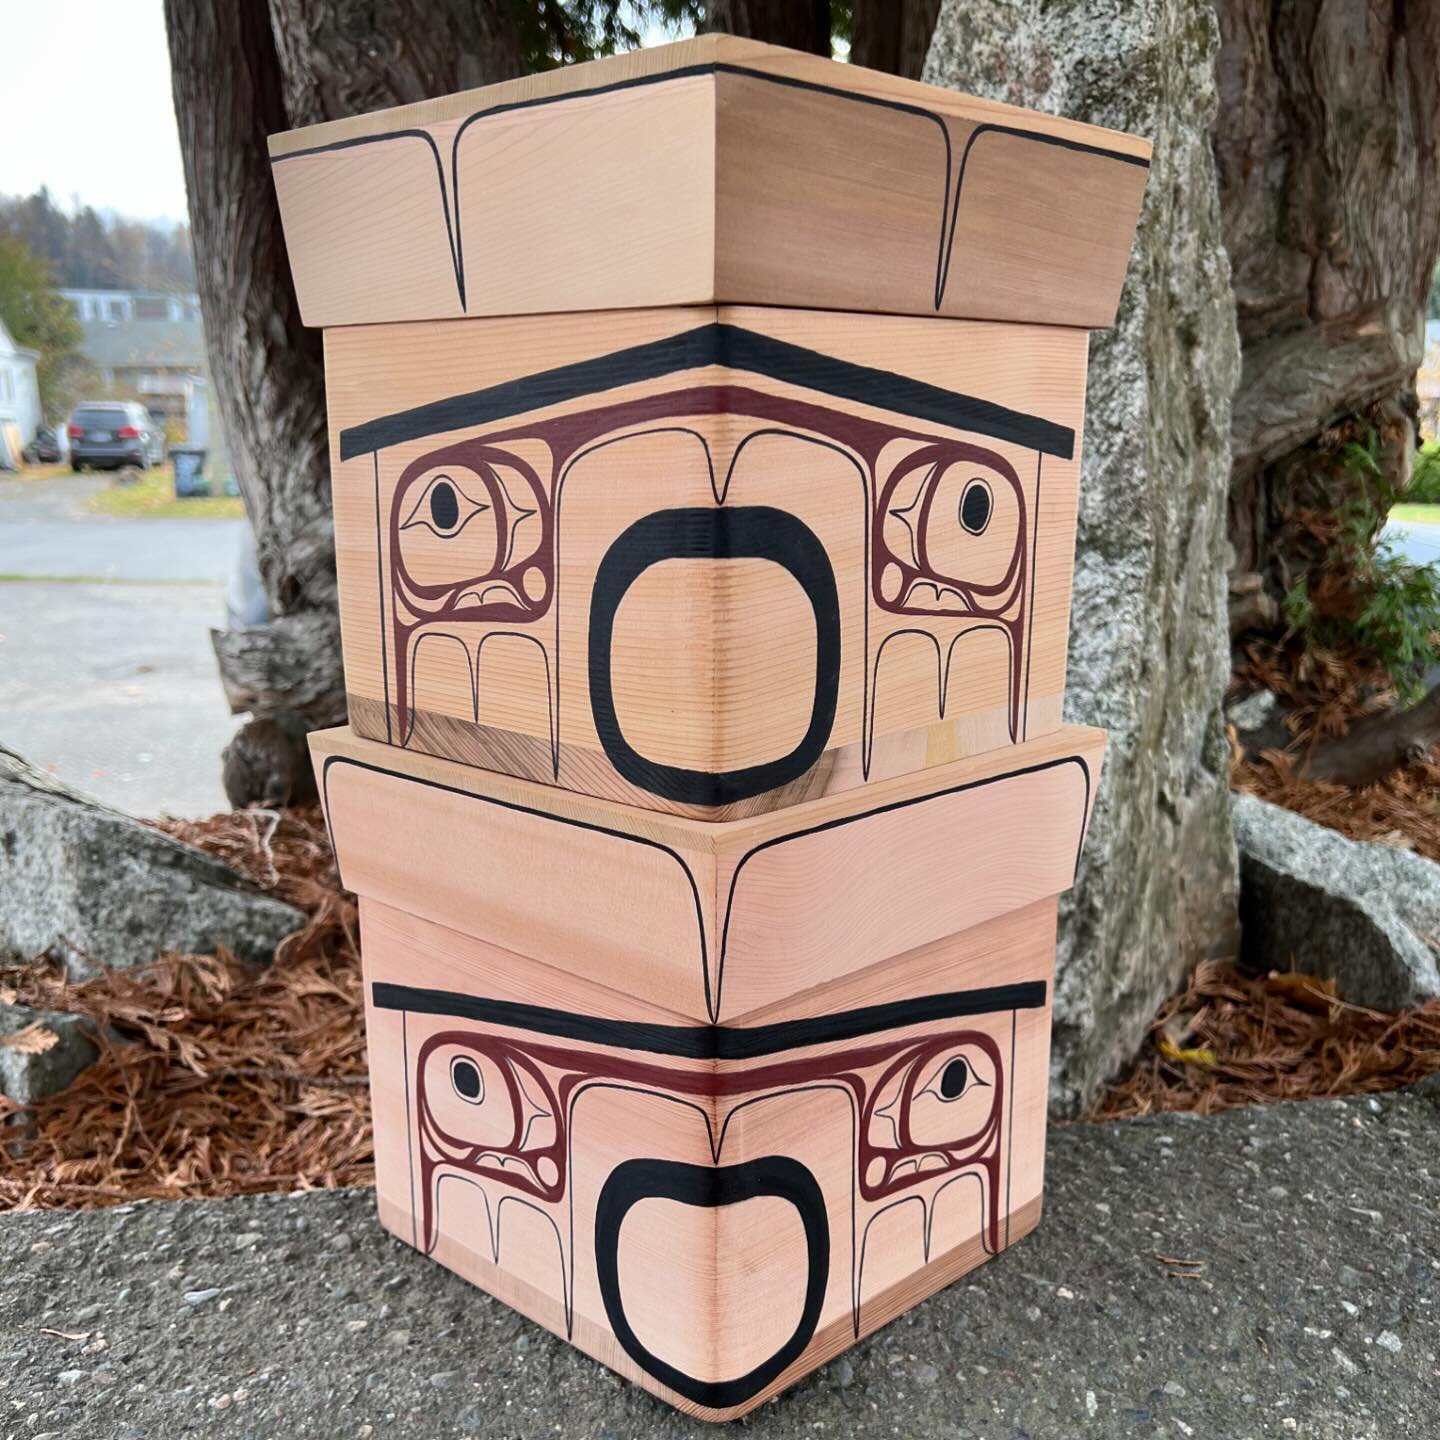 Long house design on a cedar bentwood boxes to represent community togetherness, celebrating the skills needed to build community 🤎 

I love painting on these boxes, I get excited every time I&rsquo;m asked to do so. 
By the way I did NOT make these